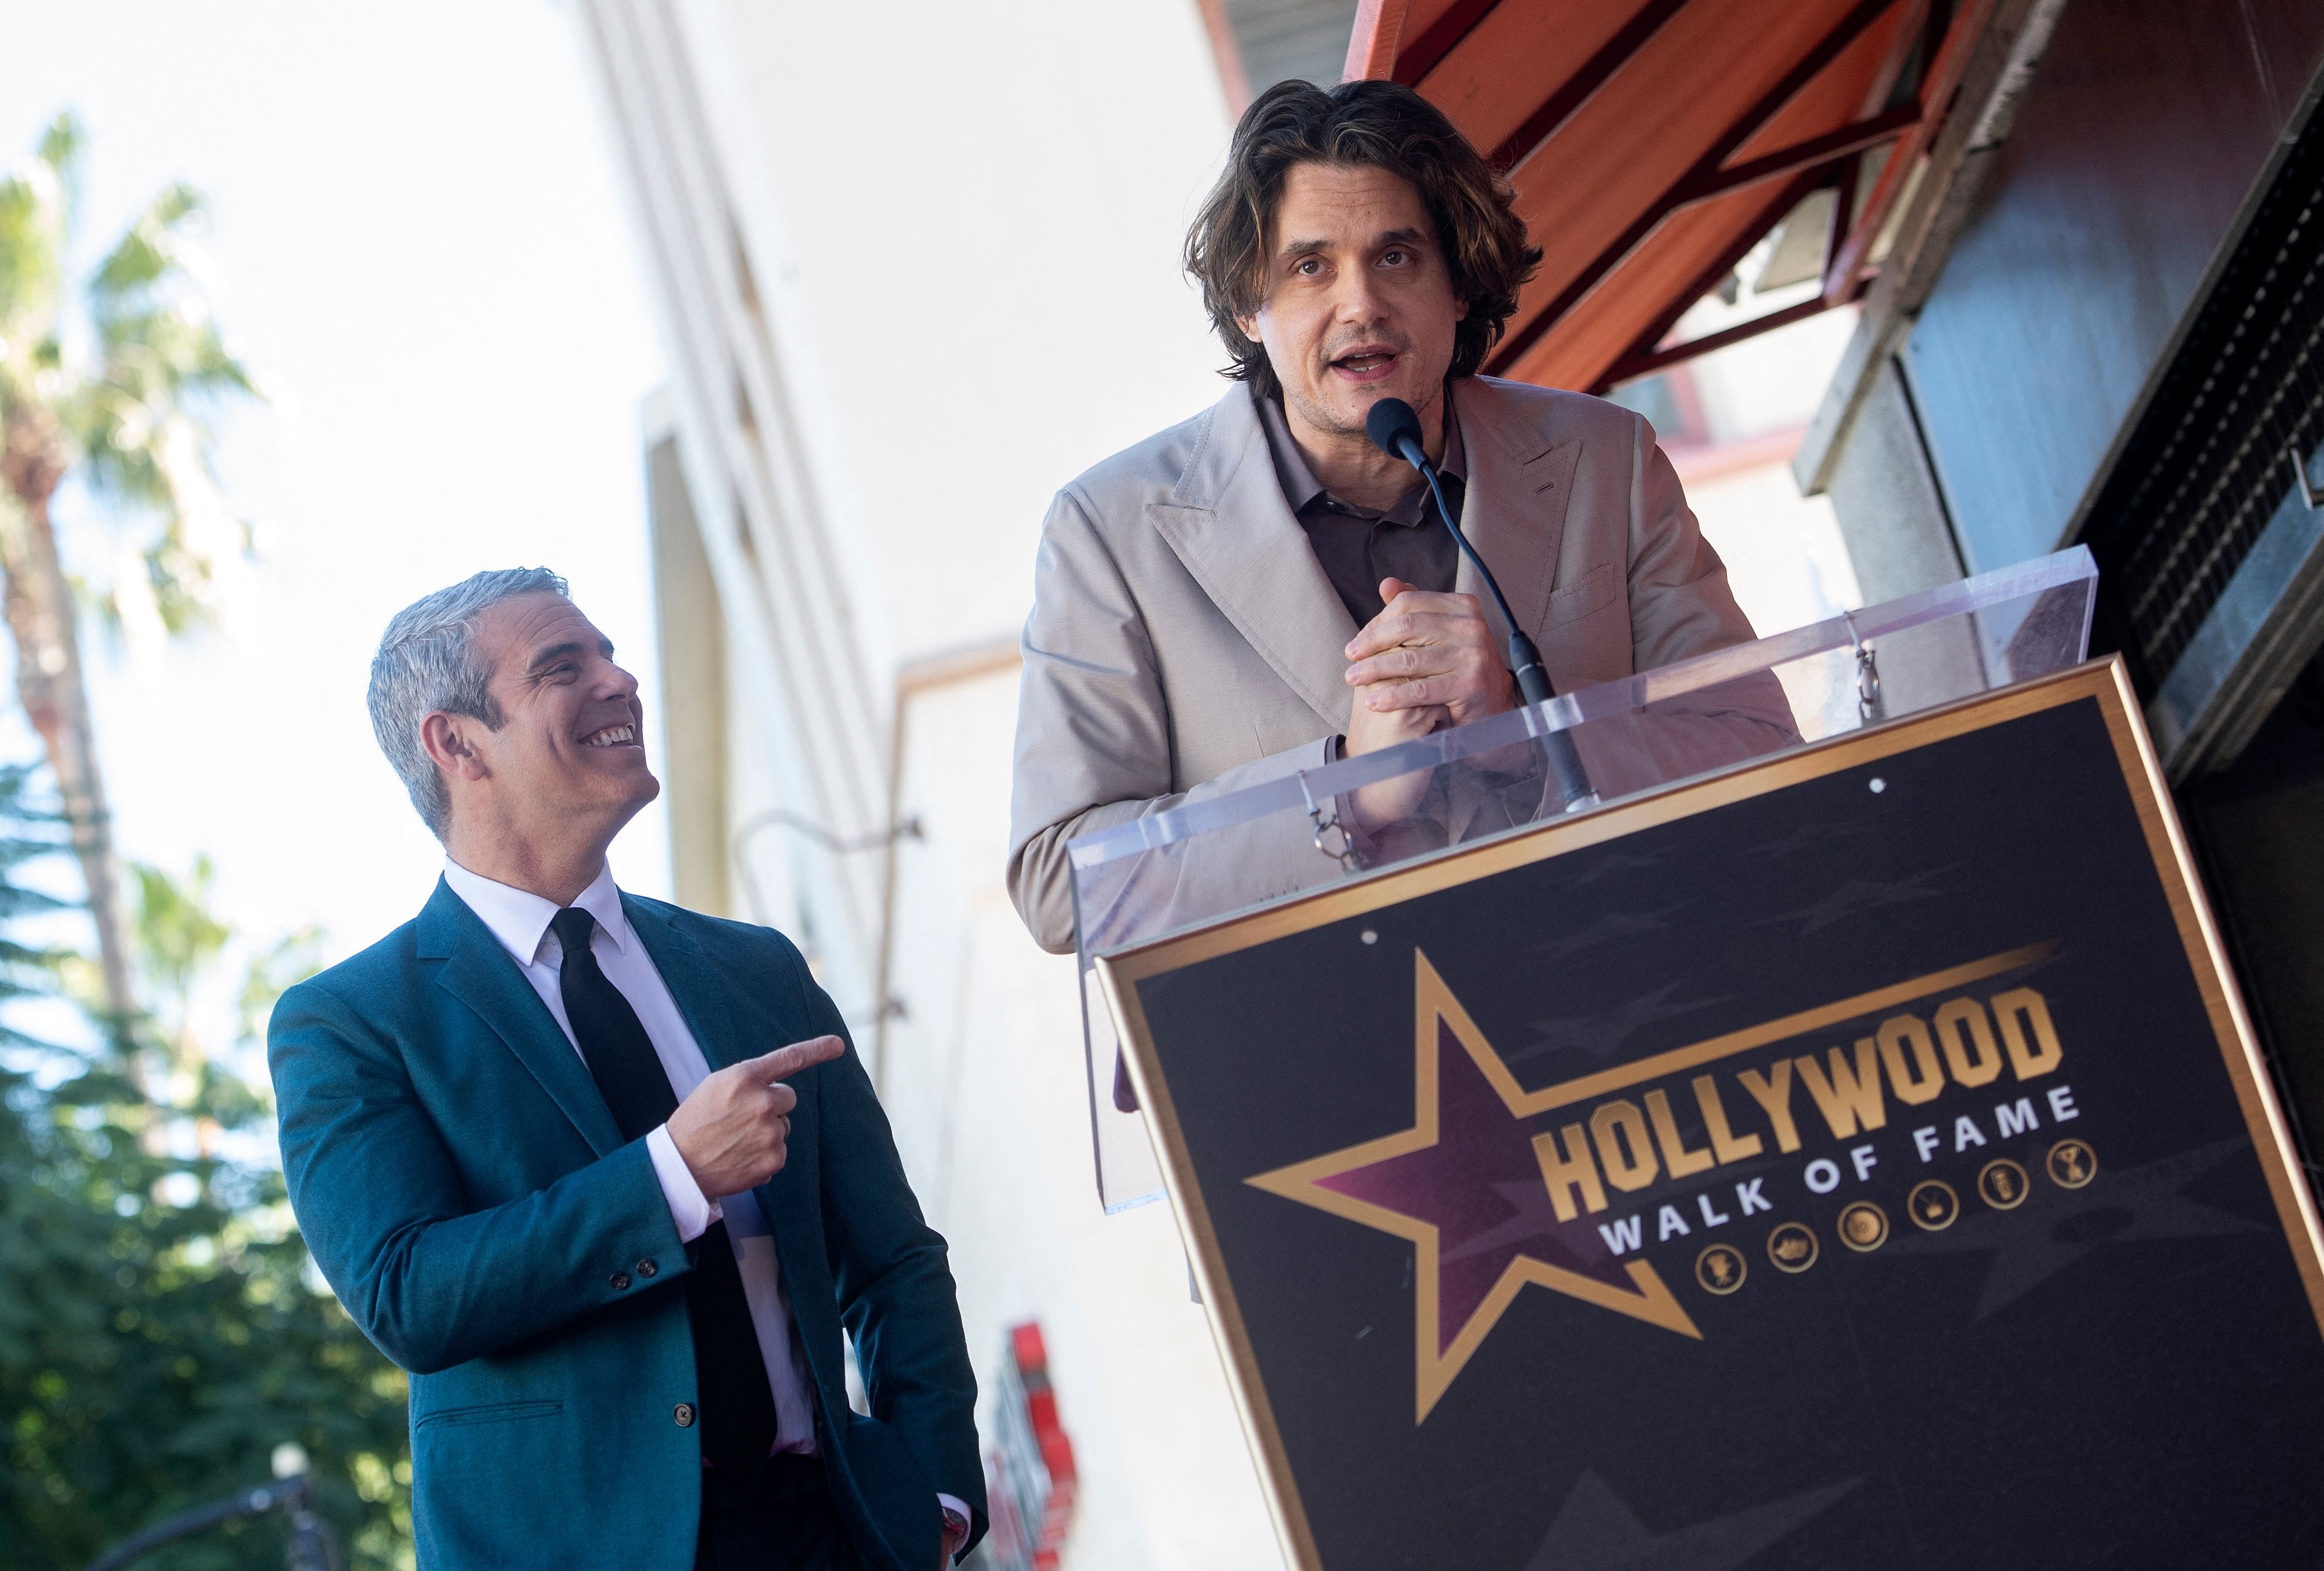 US singer-songwriter John Mayer (R) speaks onstage during the ceremony to honor Talk Show host Andy Cohen (L) with a Hollywood Walk of Fame star in Los Angeles, California, on 4 February 2022